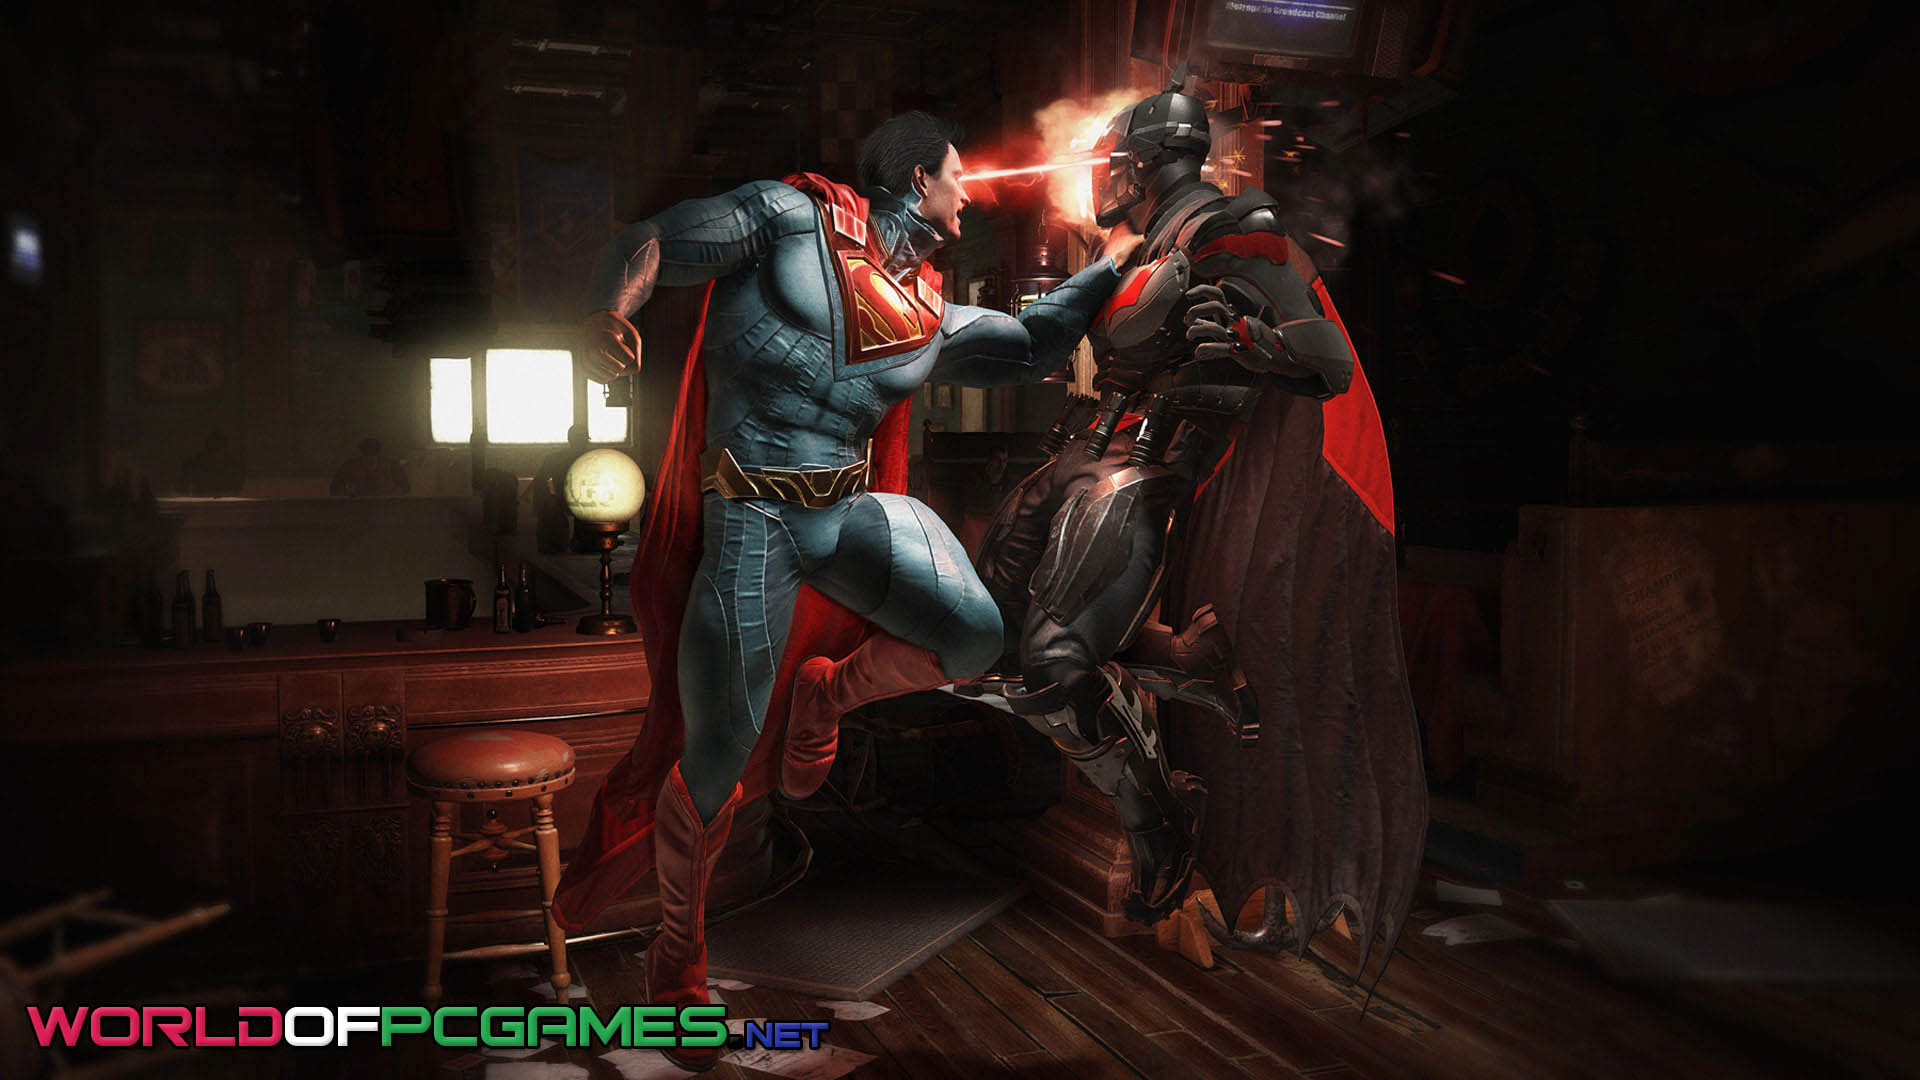 Injustice 2 Repack Free Download By worldof-pcgames.net